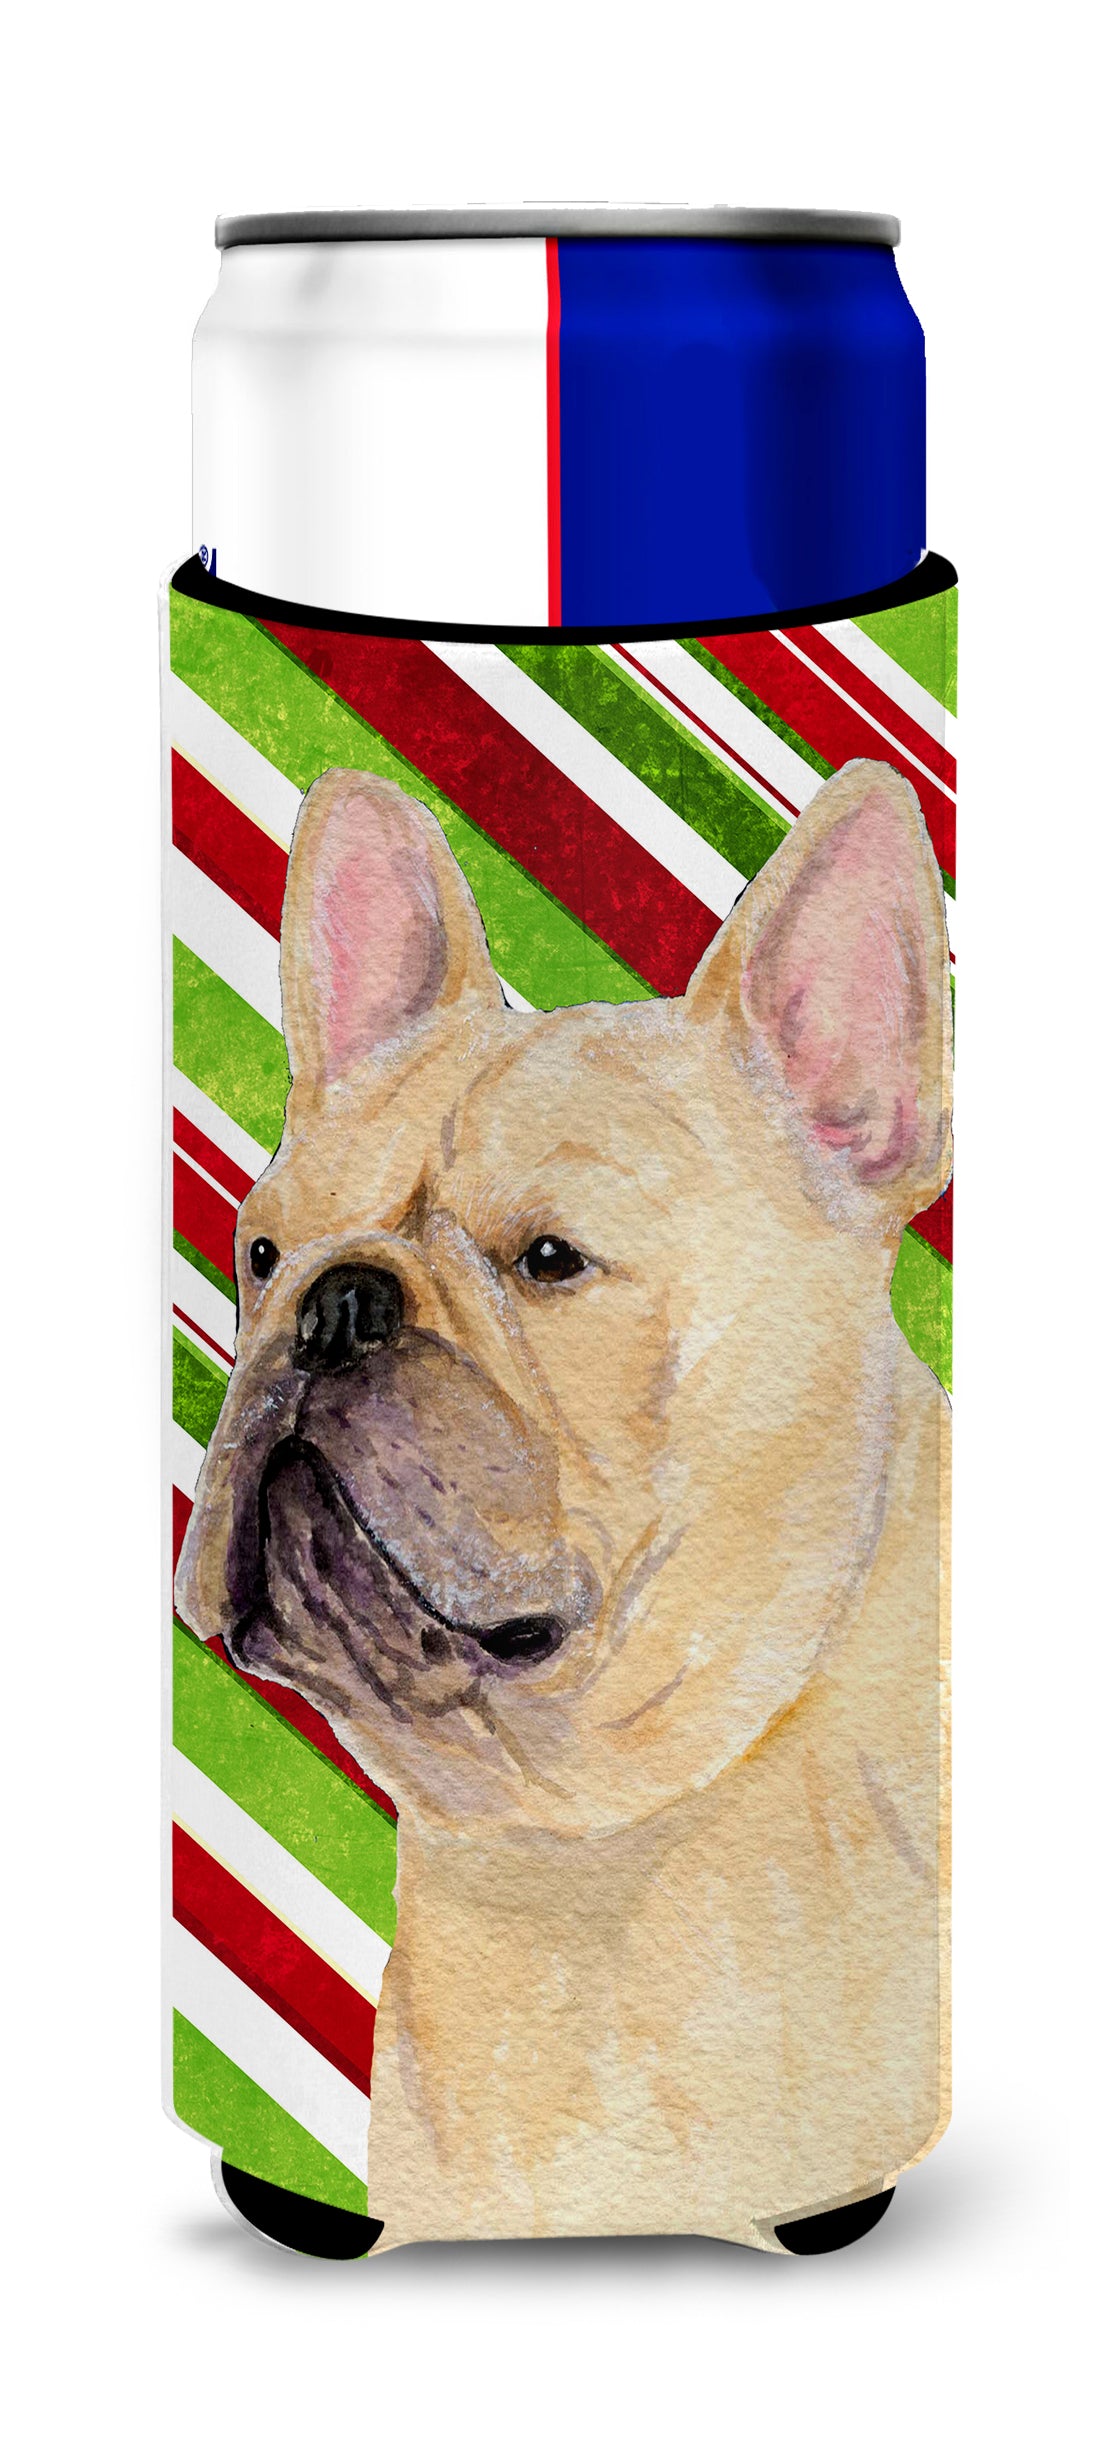 French Bulldog Candy Cane Holiday Christmas Ultra Beverage Insulators for slim cans SS4554MUK.